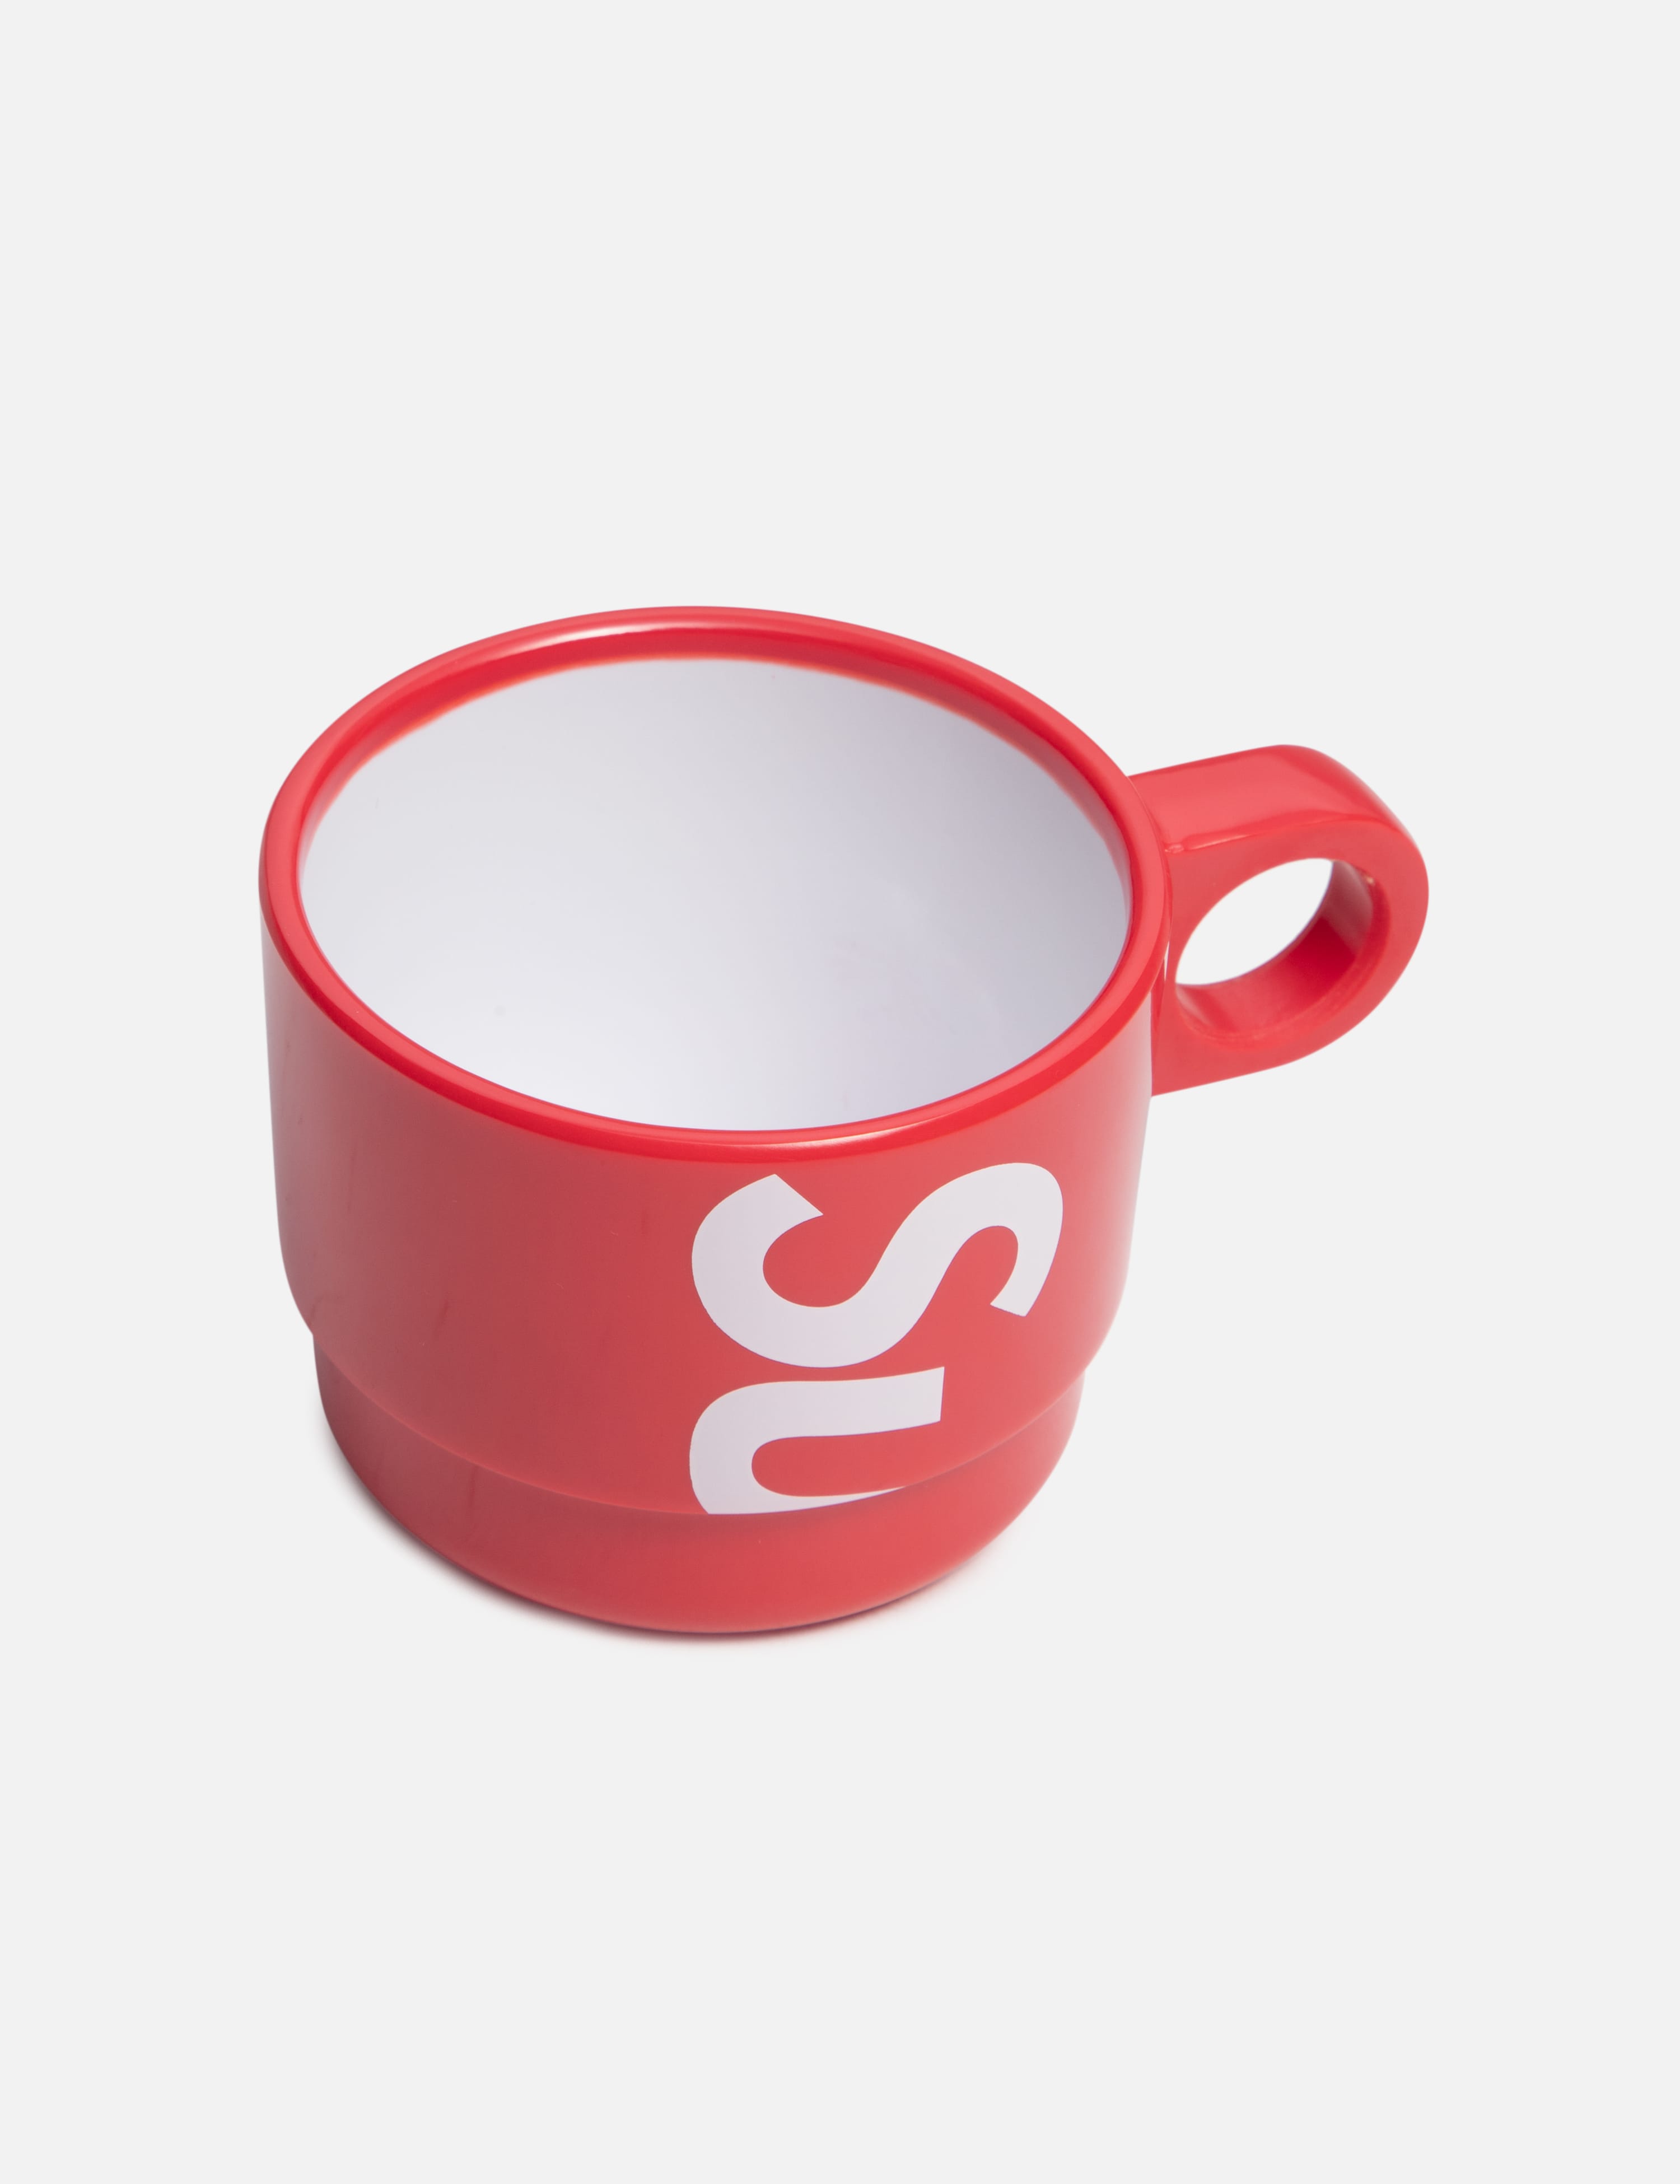 Supreme - SUPREME STACKING CUPS | HBX - Globally Curated Fashion